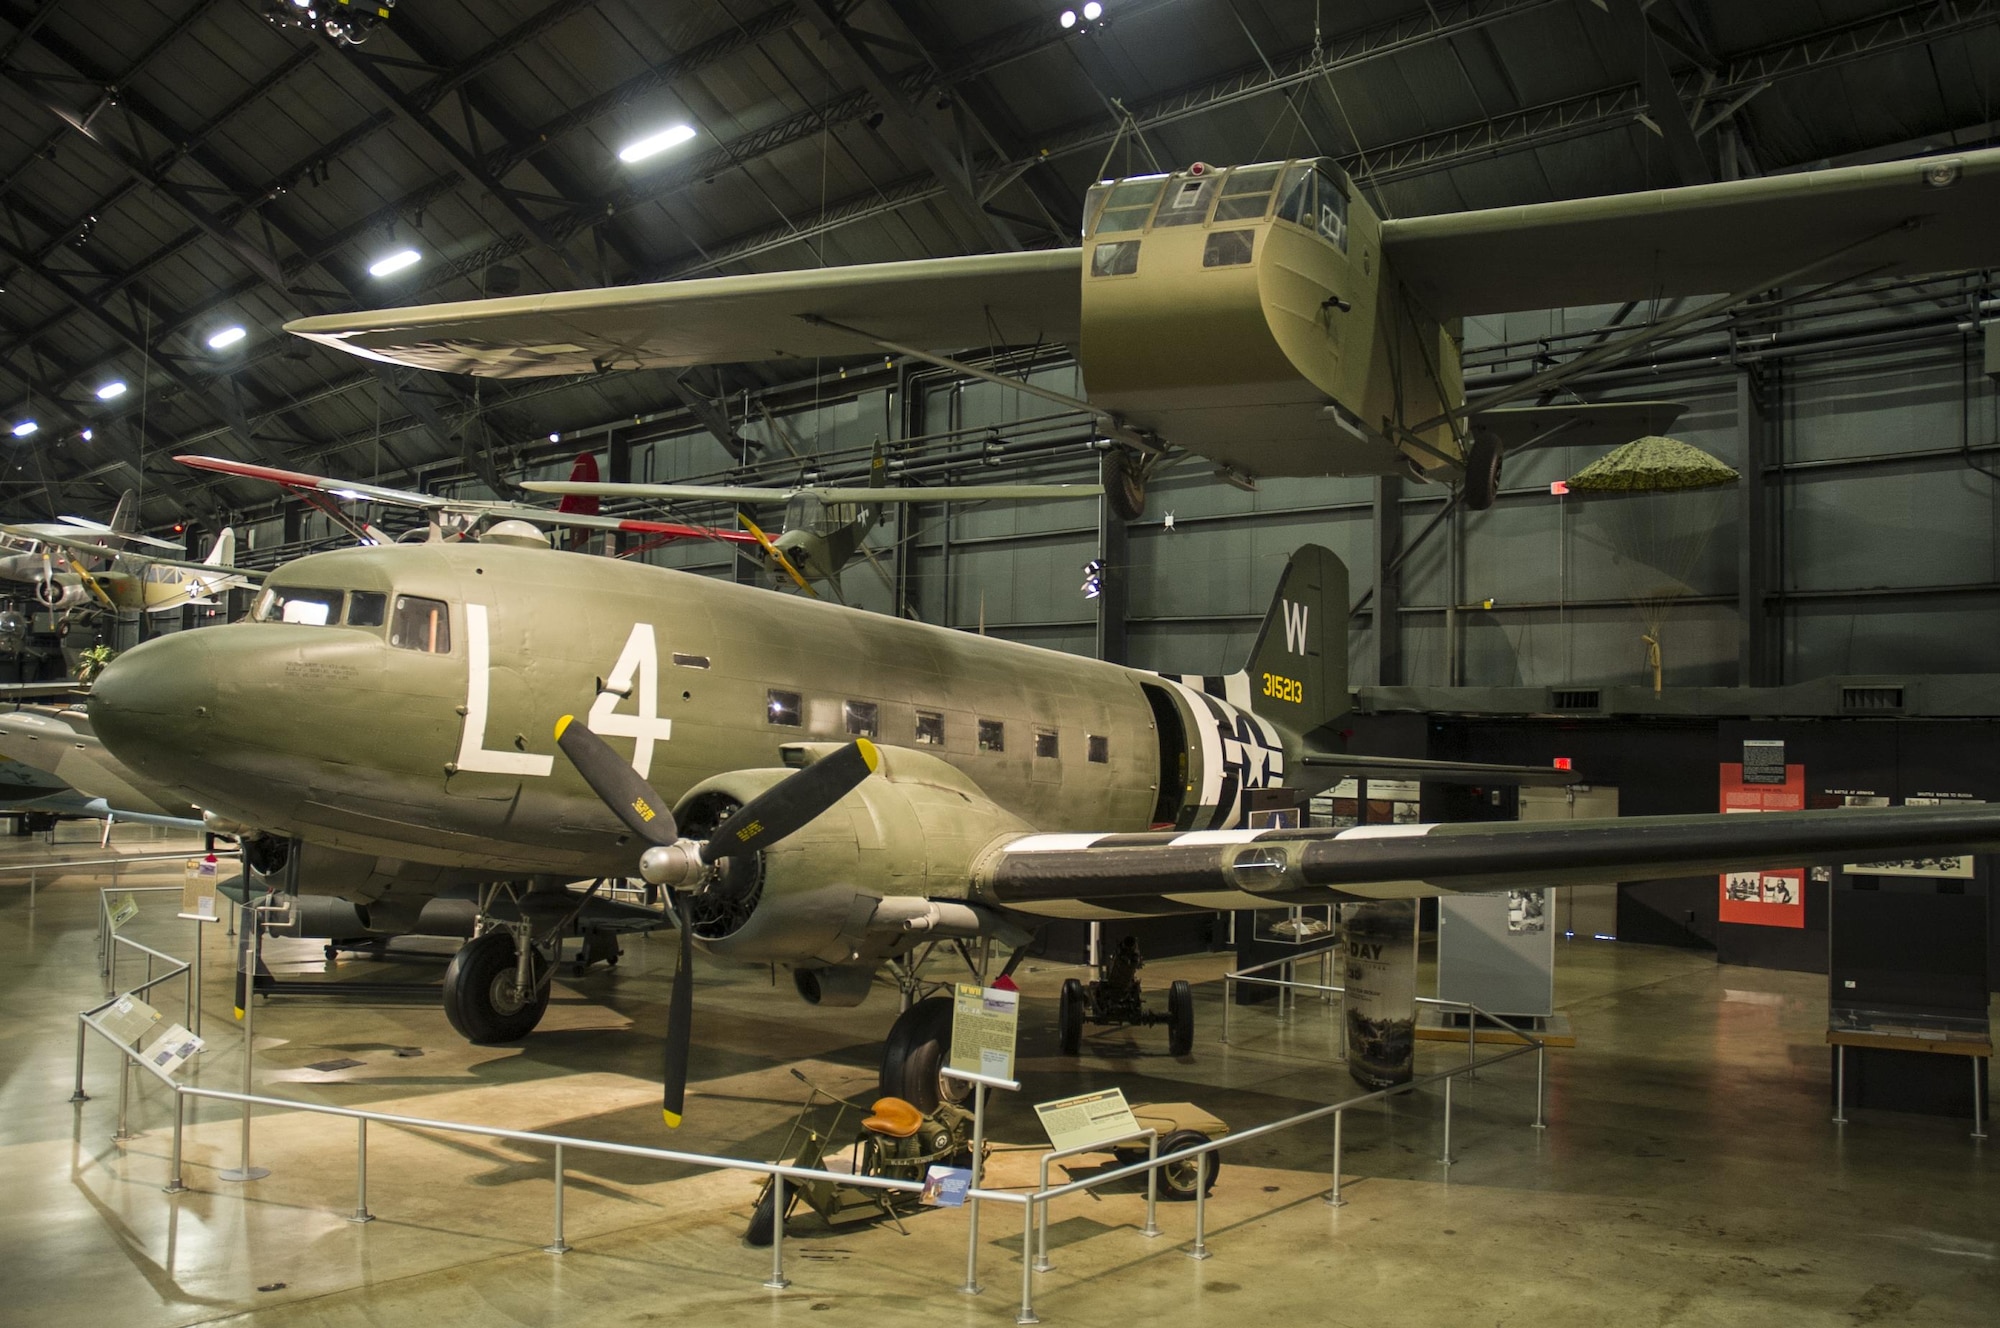 DAYTON, Ohio -- Douglas C-47D and Waco CG-4A in the World War II Gallery of the National Museum of the United States Air Force. (U.S. Air Force photo)